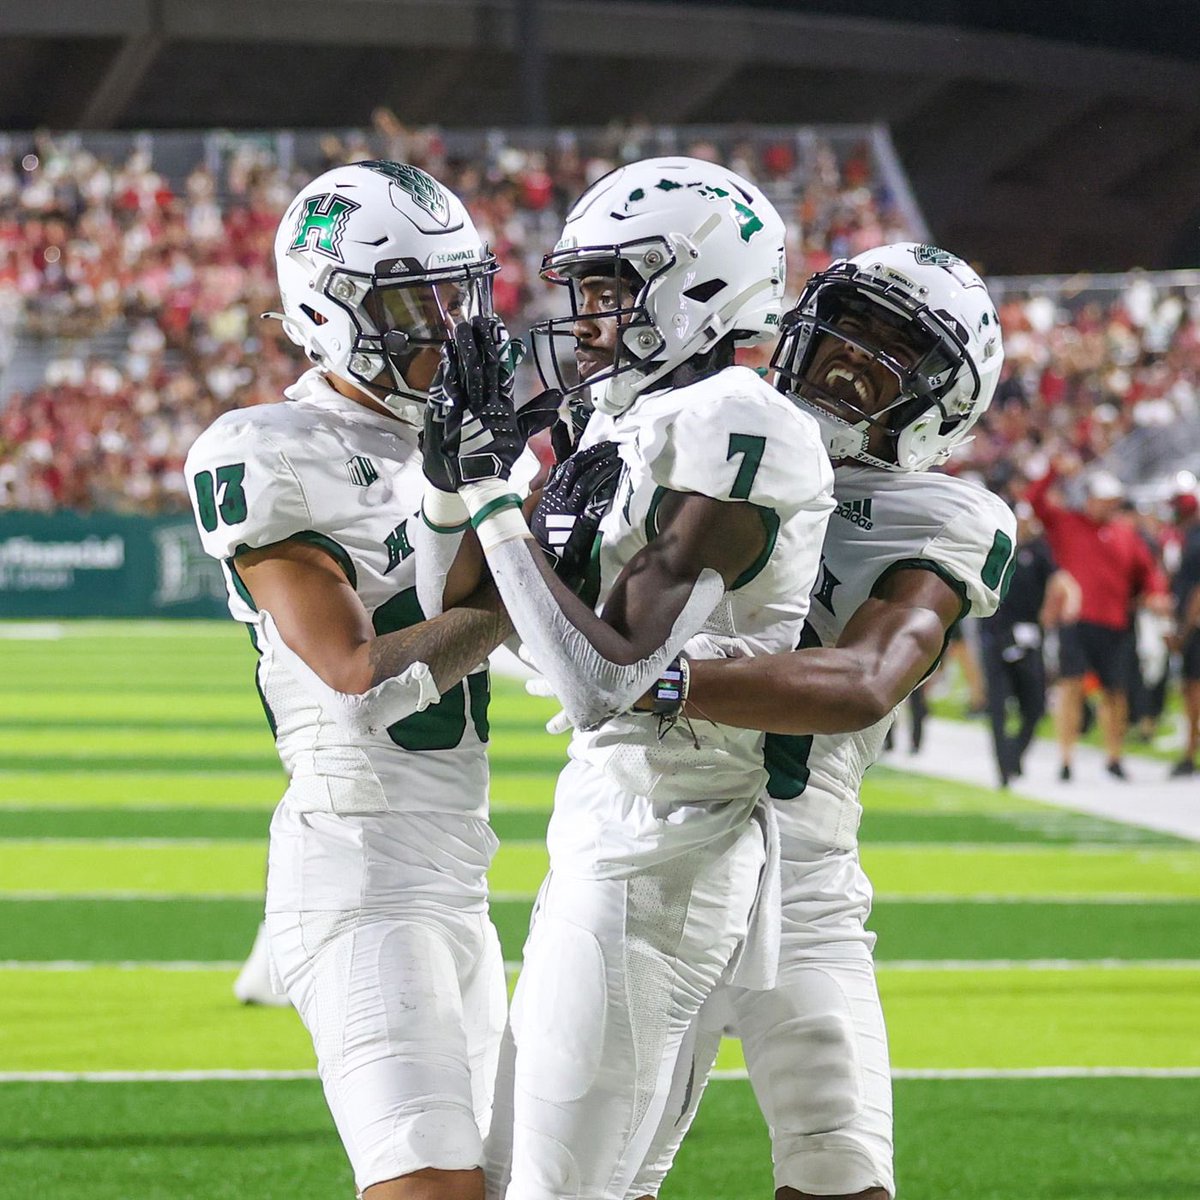 Blessed to say I have received an Opportunity to further my academic and athletic career at the university of Hawaii. Thank you @coachsteveirvin 🙏🏾 @gbowman26 @VictorJonesGE @JeffBigDreamerH